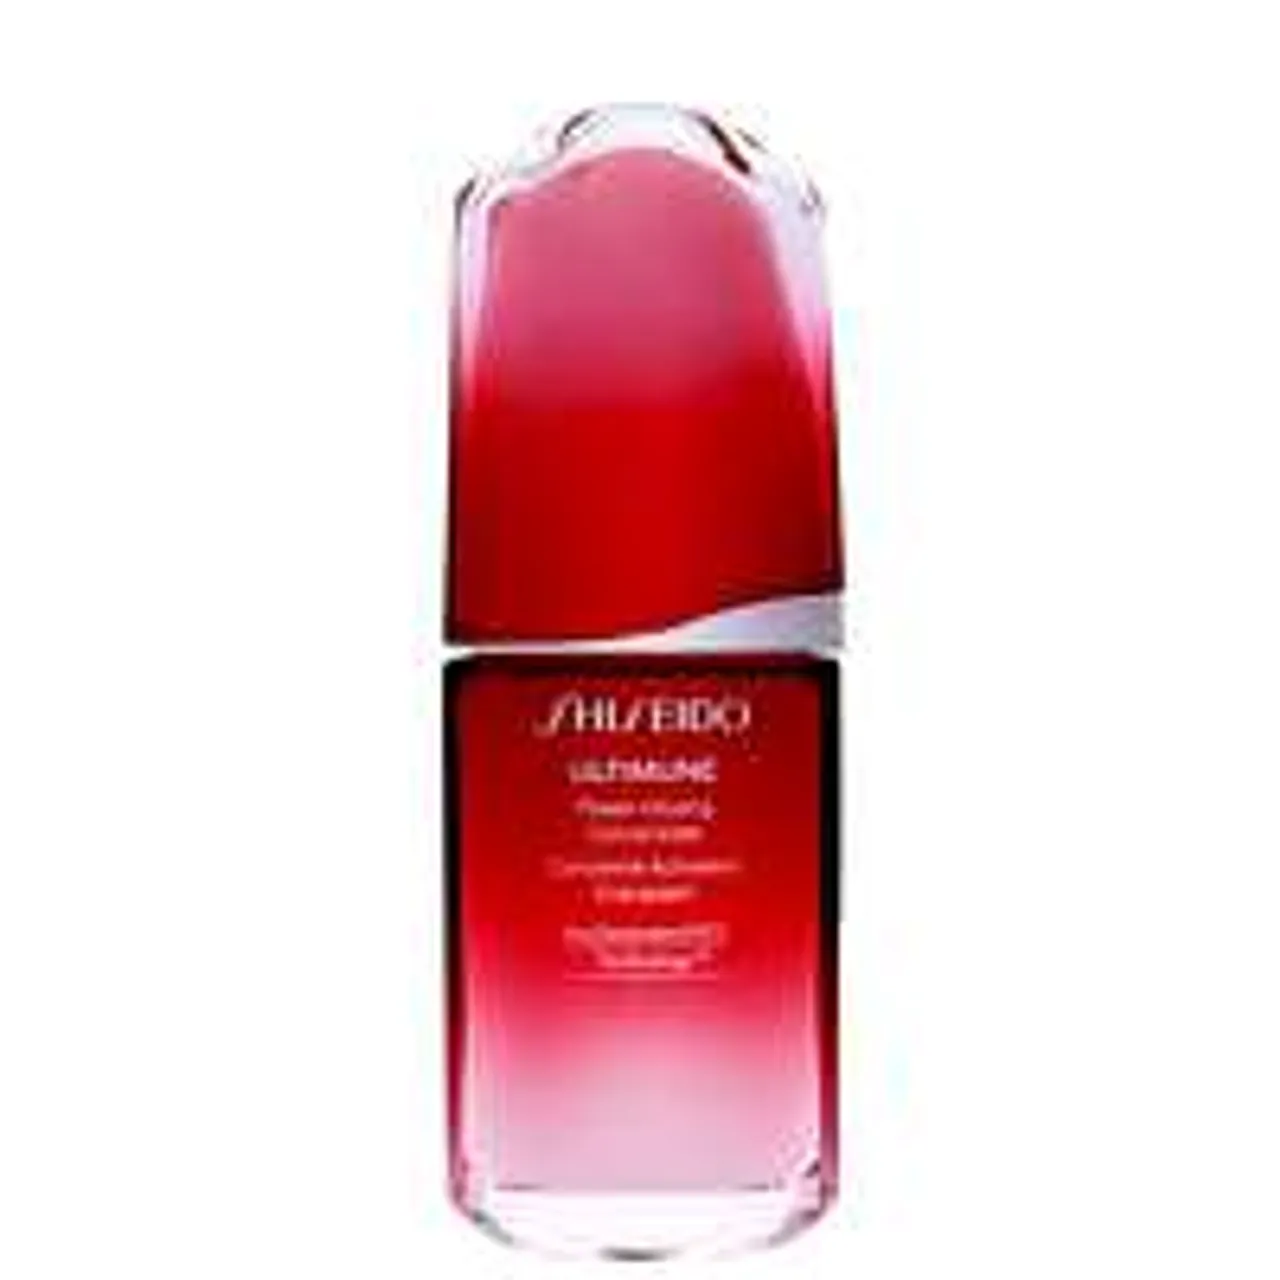 Shiseido Serums Ultimune: Power Infusing Concentrate 50ml / 1.6 fl.oz.